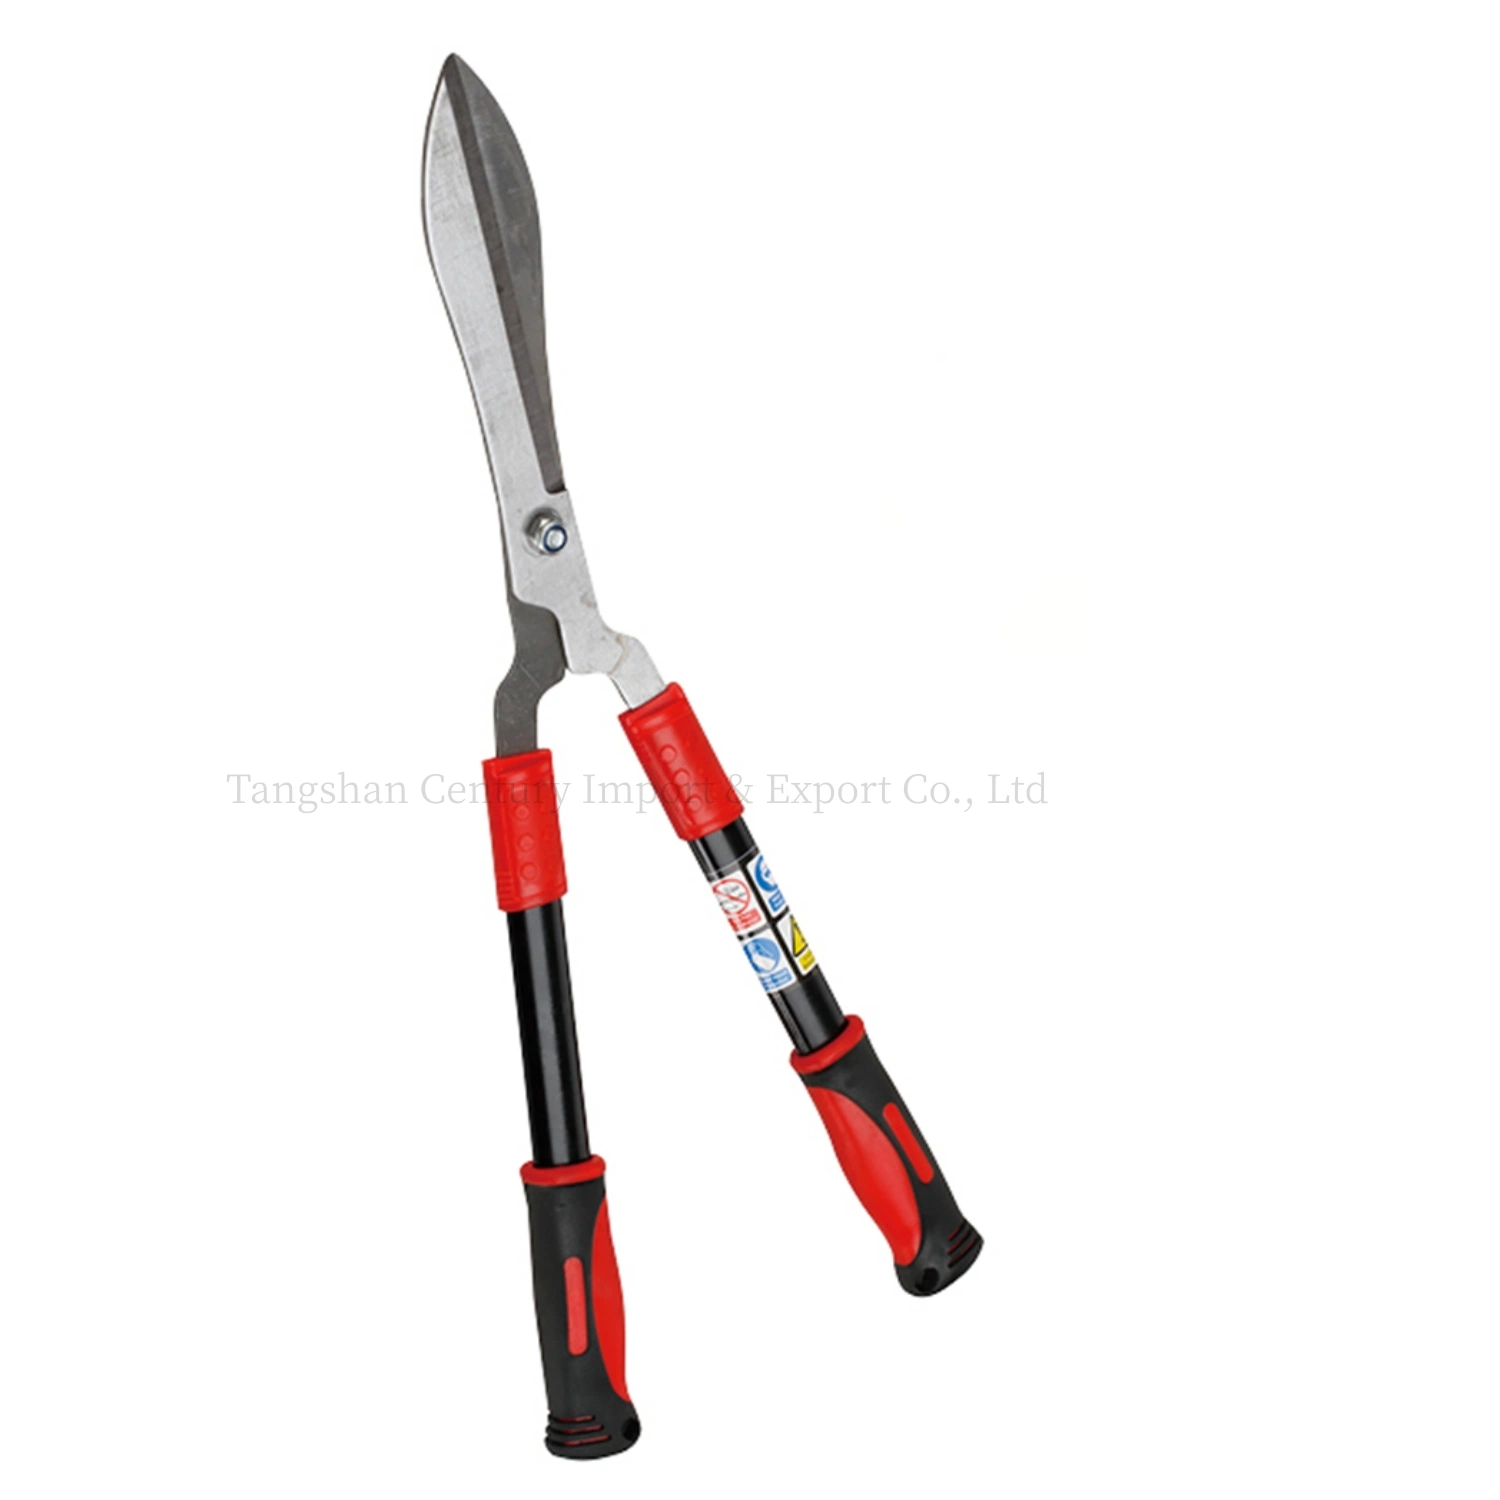 Telescopic Loppers Hand Shear Pruning Shears